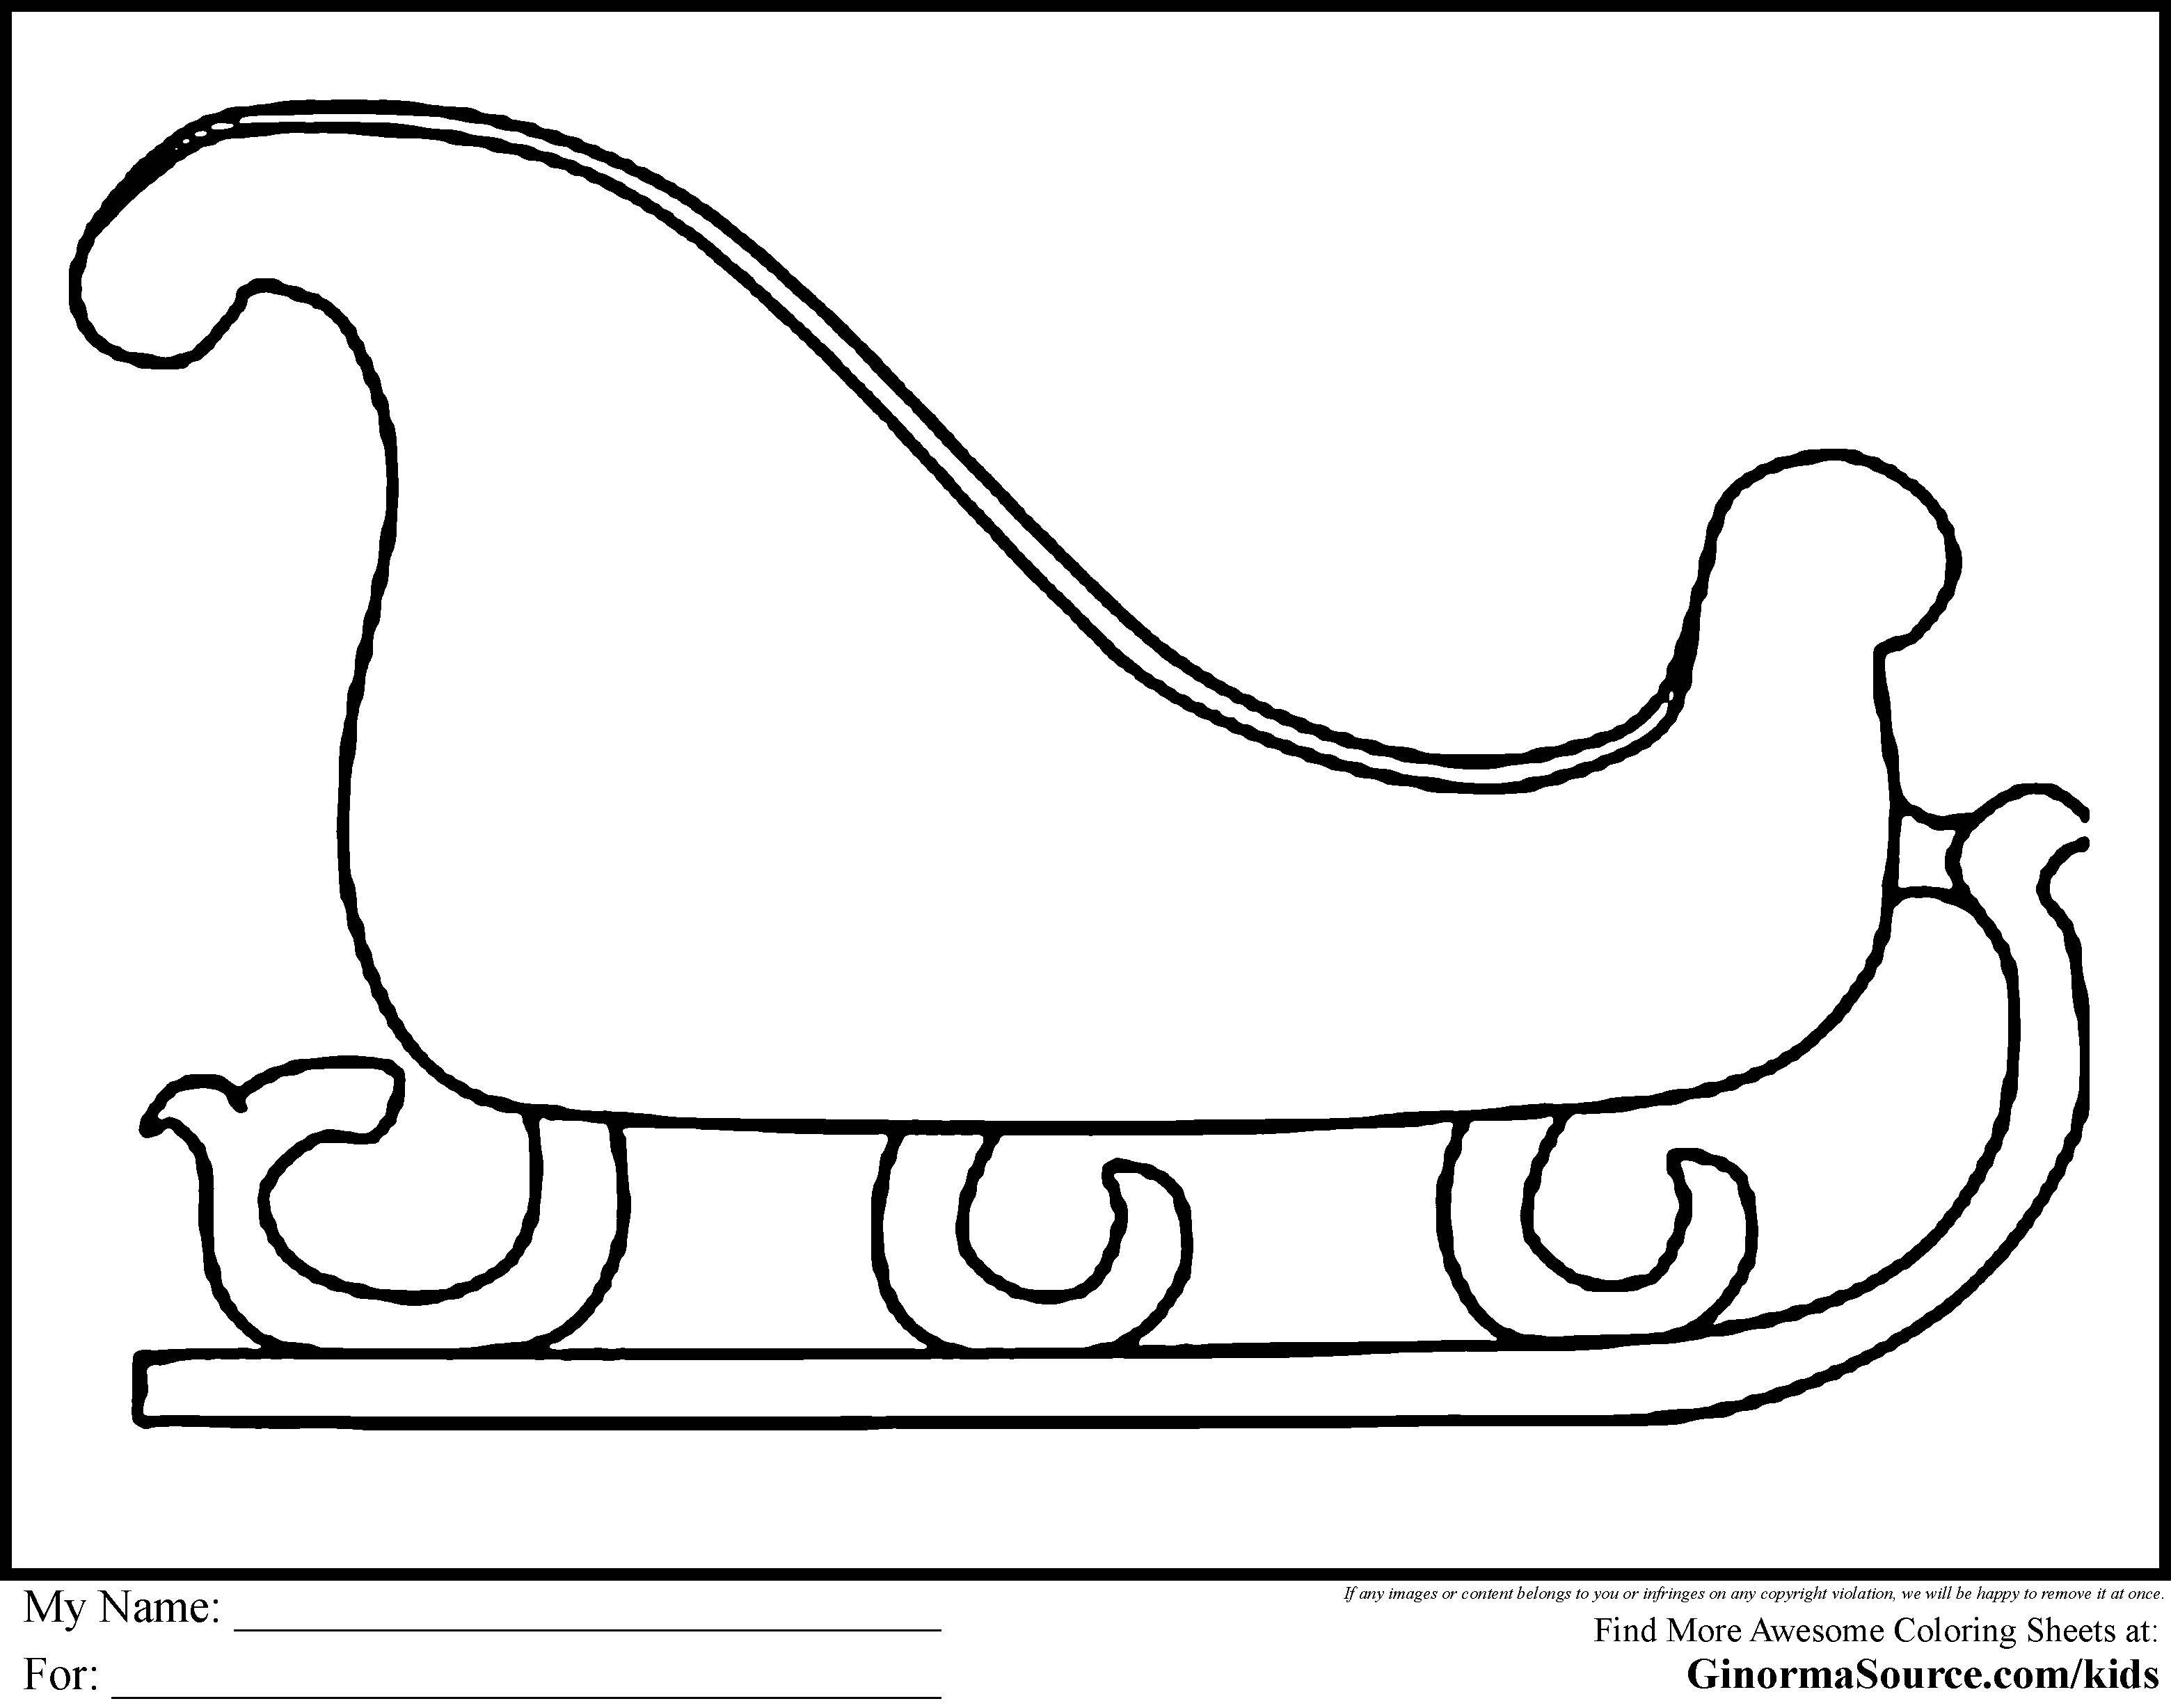 Santa Claus In Sleigh Coloring Page Sleigh Coloring Page Santa Claus Riding His Free Printable Hoofard